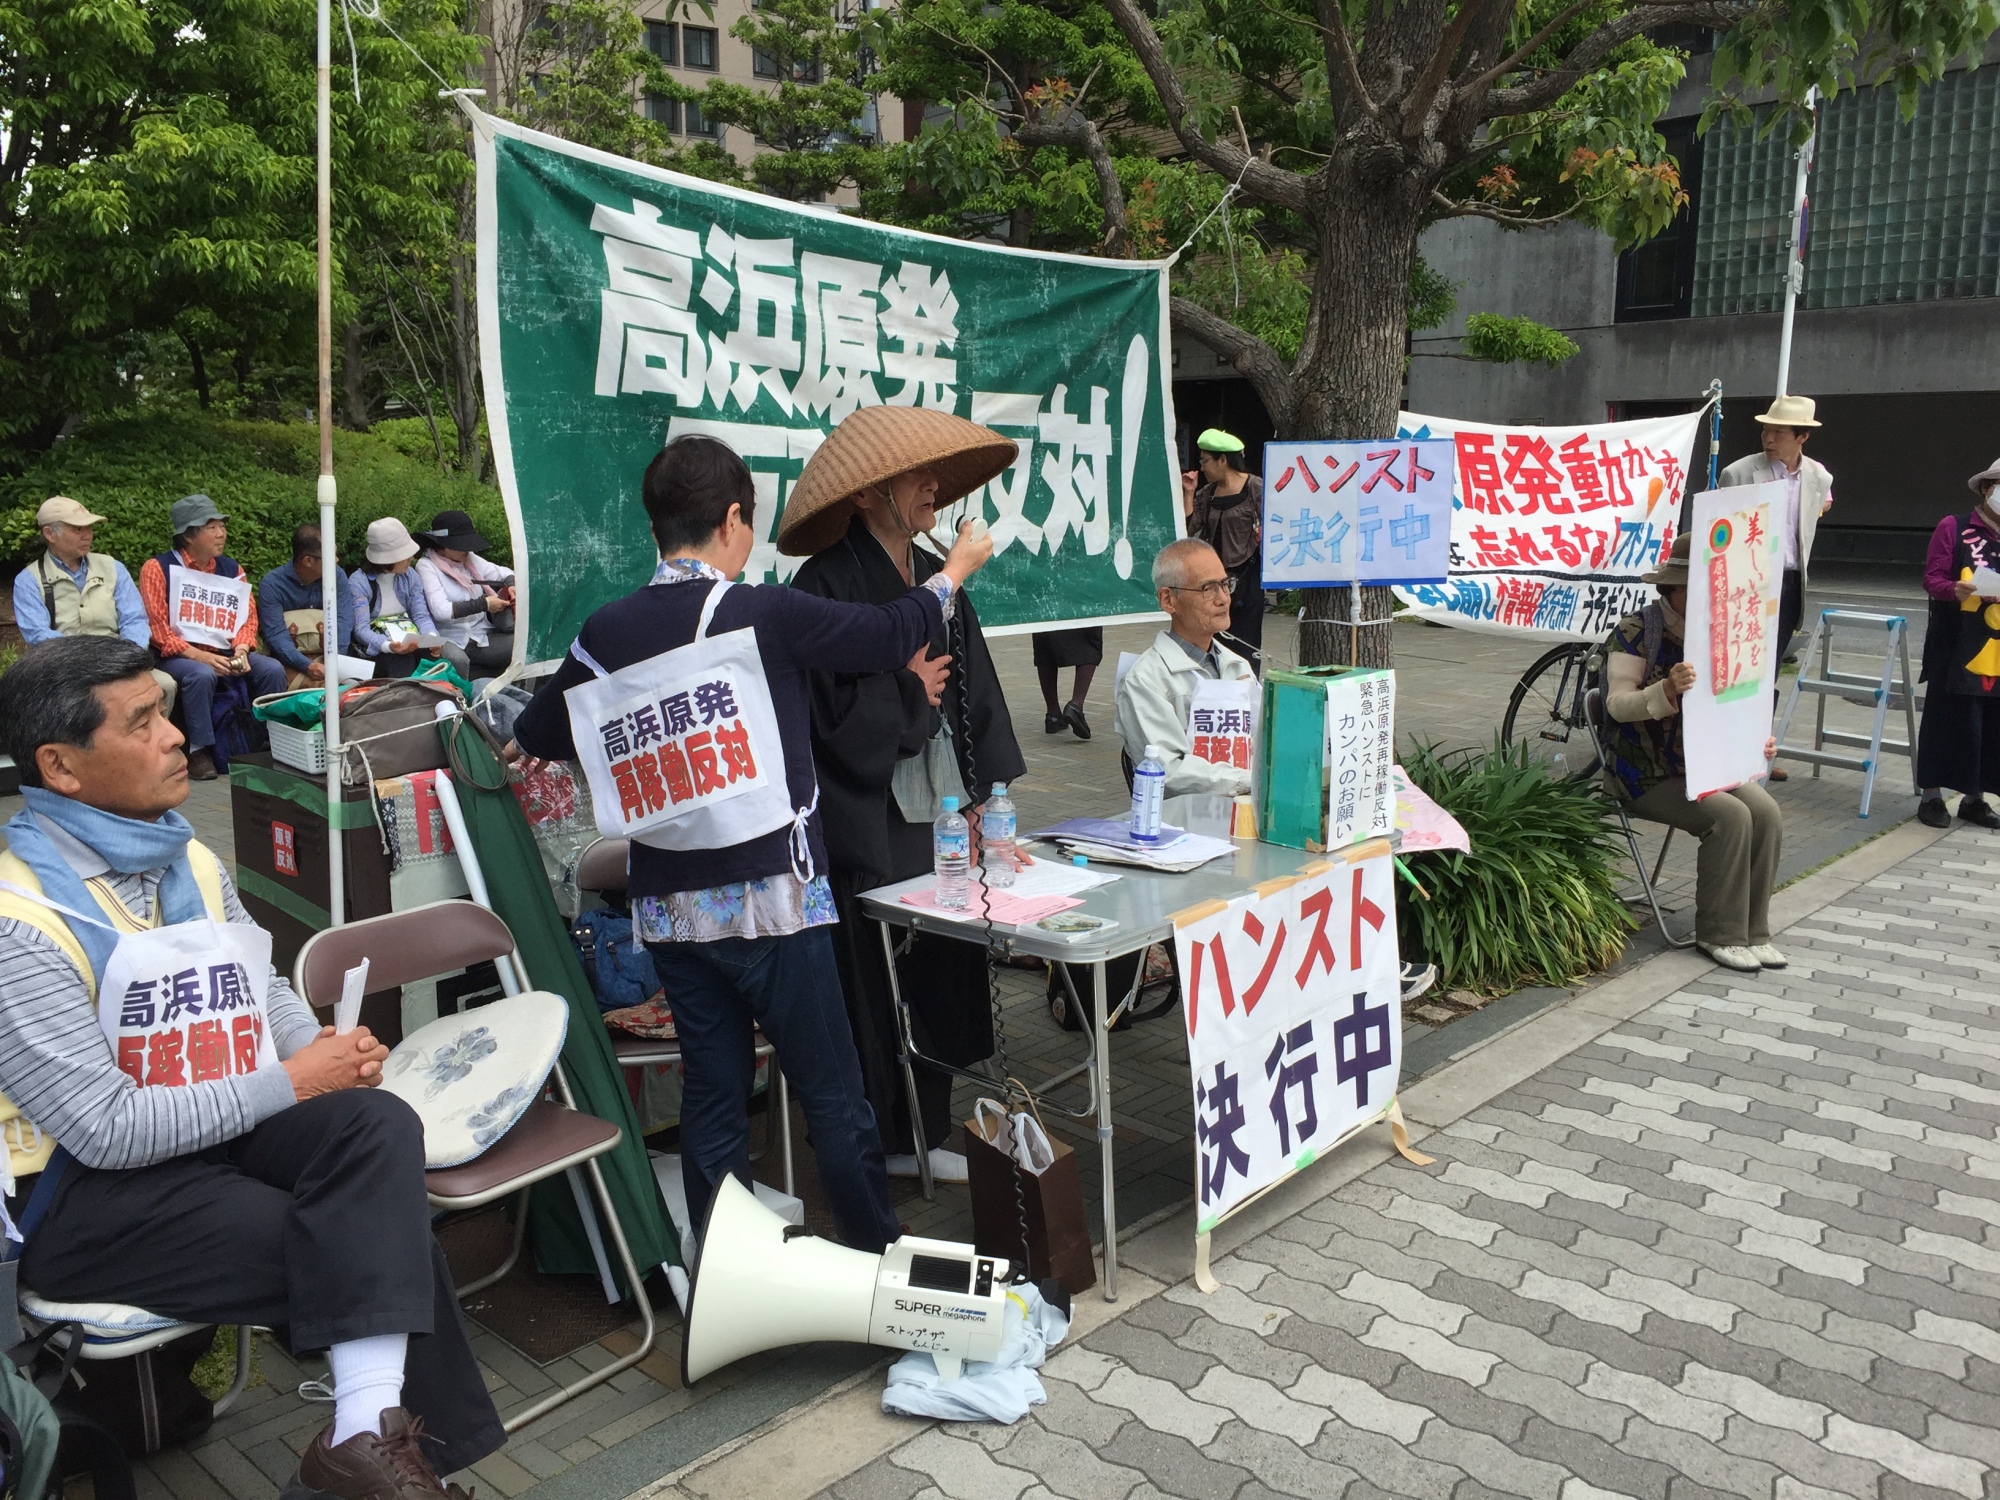 Activists gather in front of Kansai Electric Power Co.'s headquarters in Osaka on Wednesday to protest the restart of the Takahama No. 4 reactor, which is back online after more than 14 months. | ERIC JOHNSTON